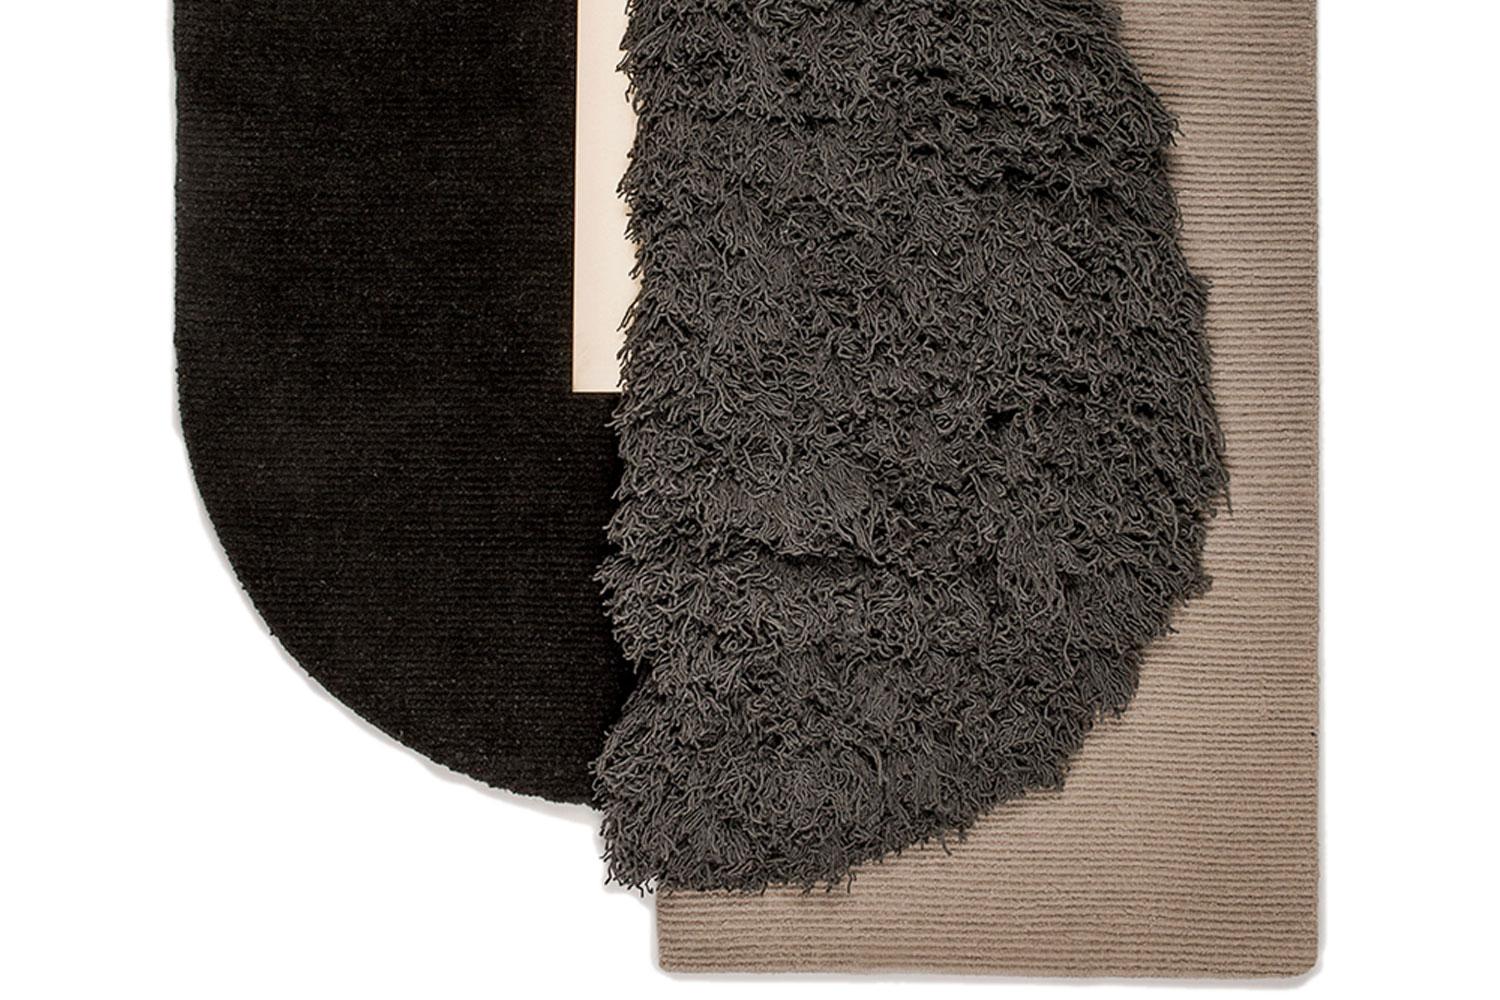 Hello Sonia wall hanging, big is designed by Studiopepe and manufactured by CC-Tapis. Proudly handmade in Nepal from 100% Himalayan wool with a brass hanger.

Studiopepe is a design agency renowned for its eclectic and layered perspective. Founded